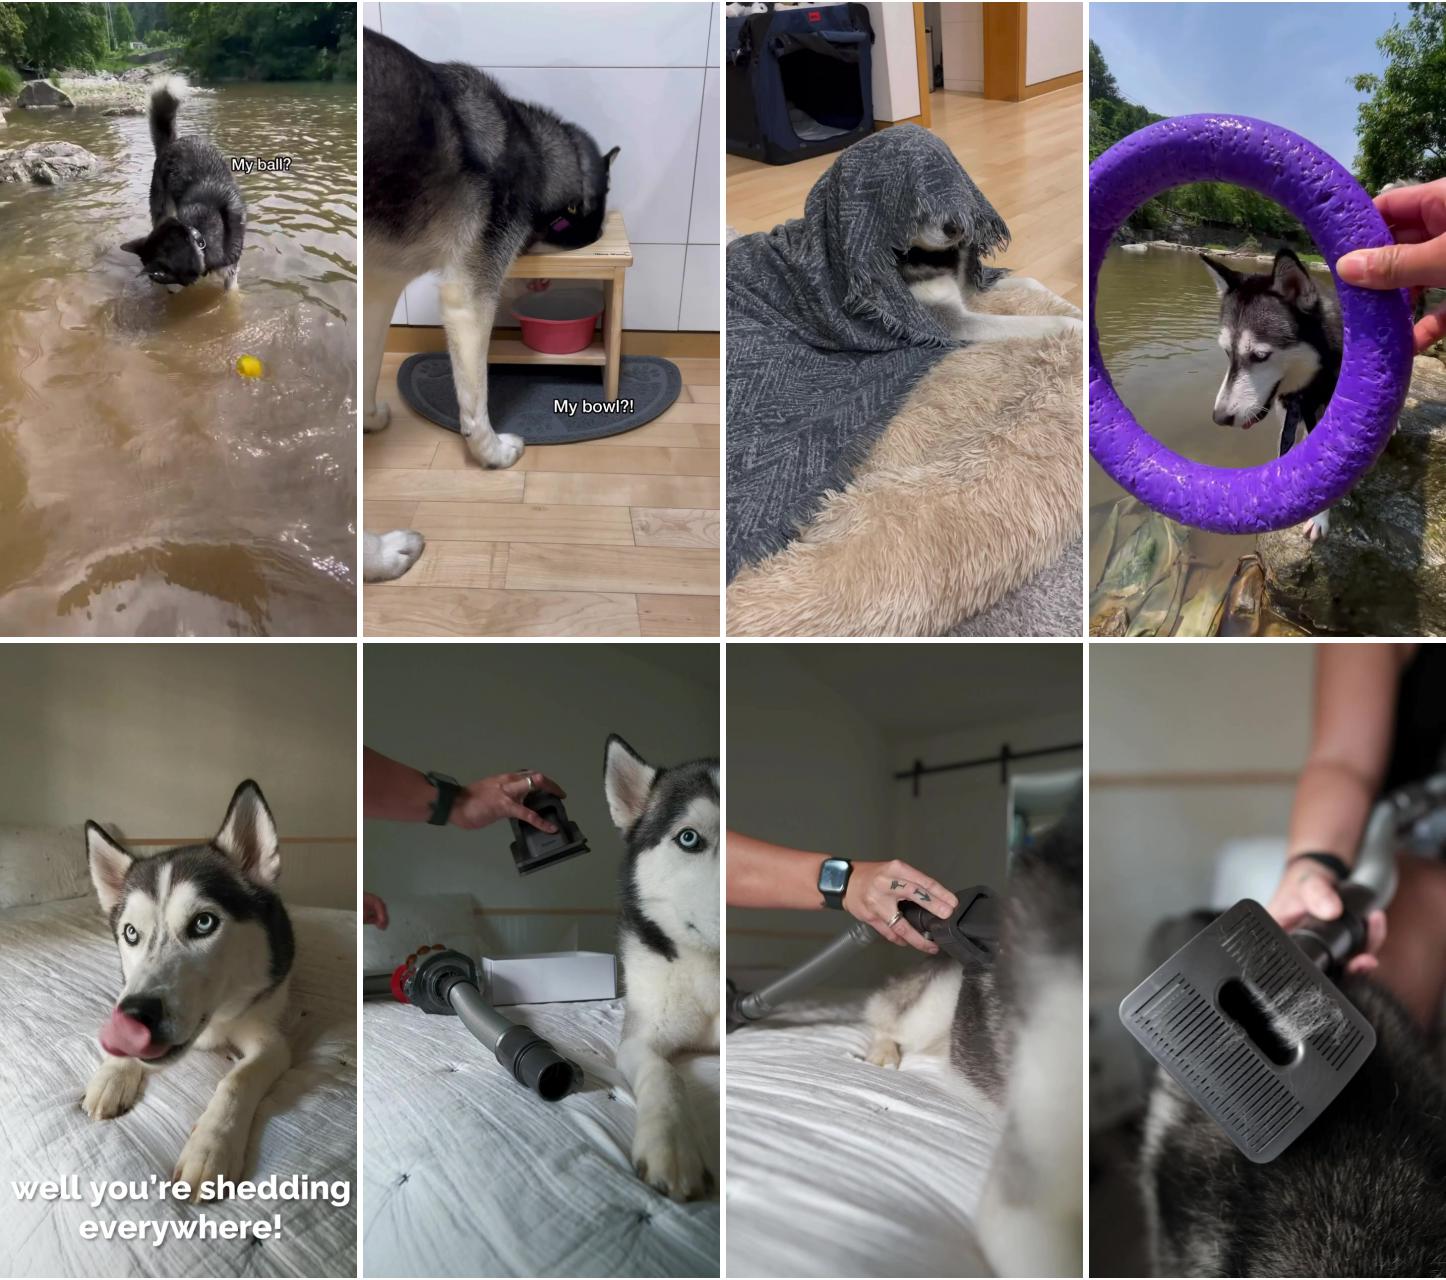 Smart in my own husky way; keep your pet comfortable and groom at home with dyson's new pet grooming kit